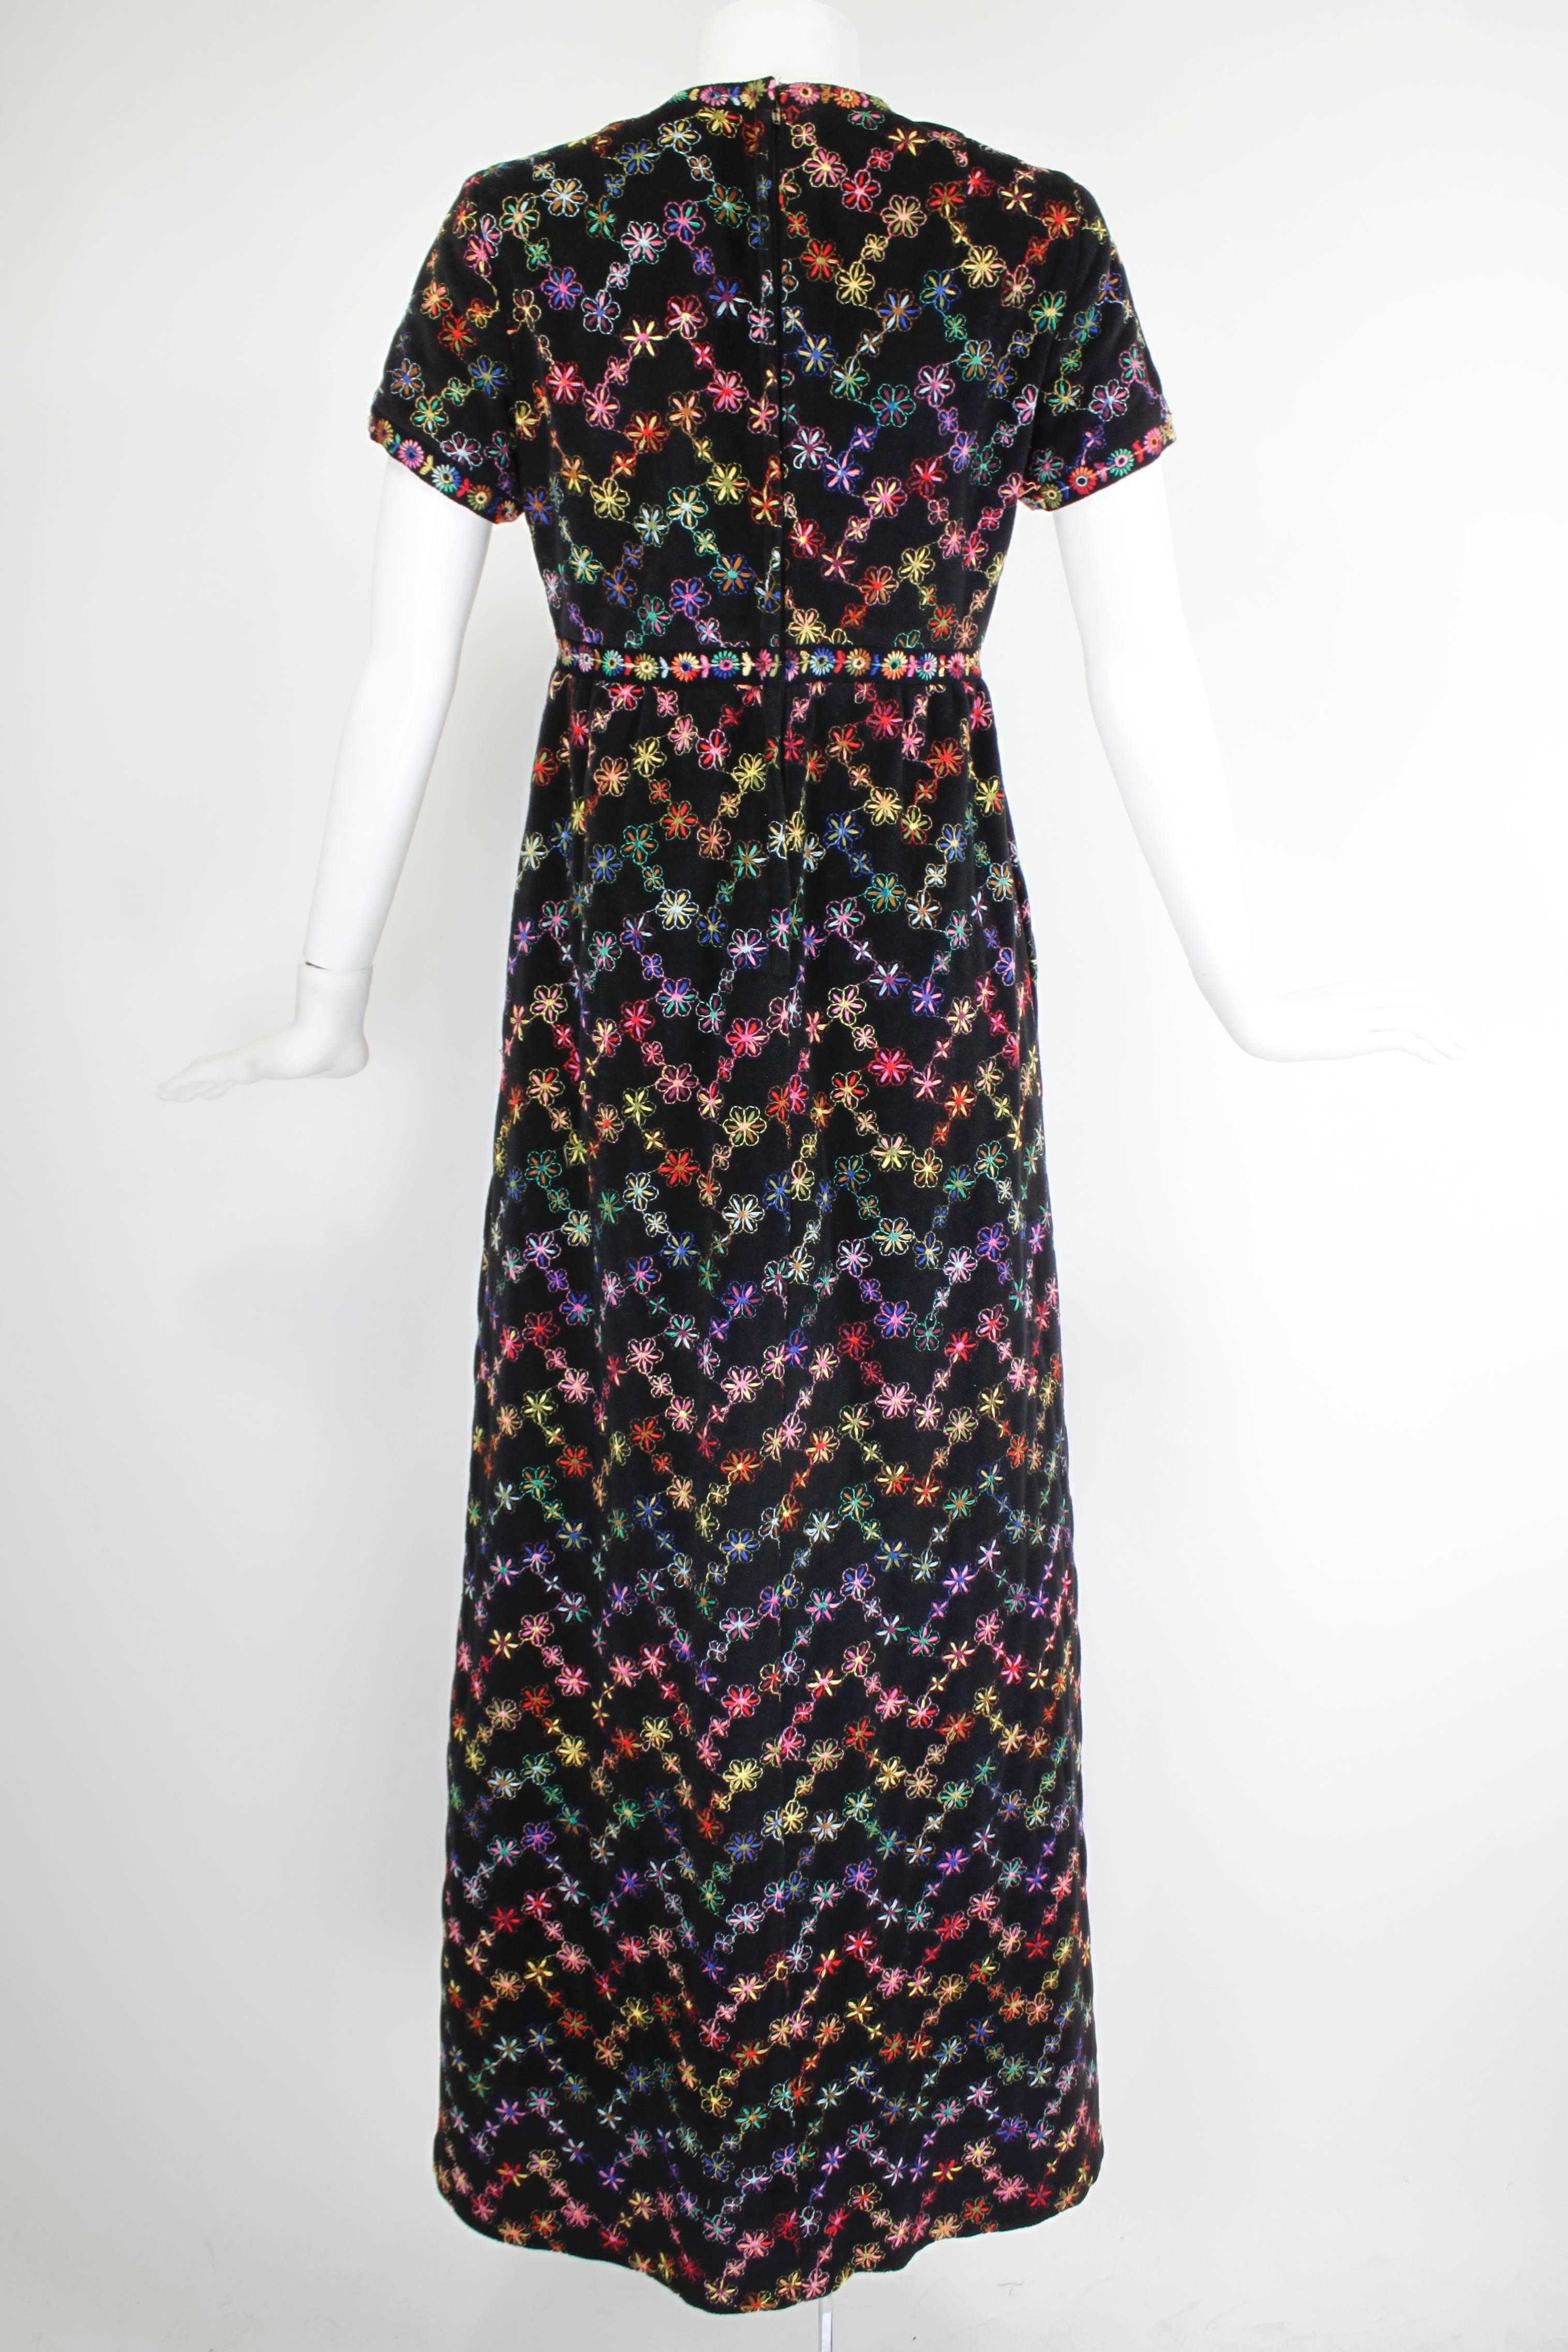 Women's 1970s Sant' Angelo Attribution Black Rainbow Embroidered Floral Maxi Dress